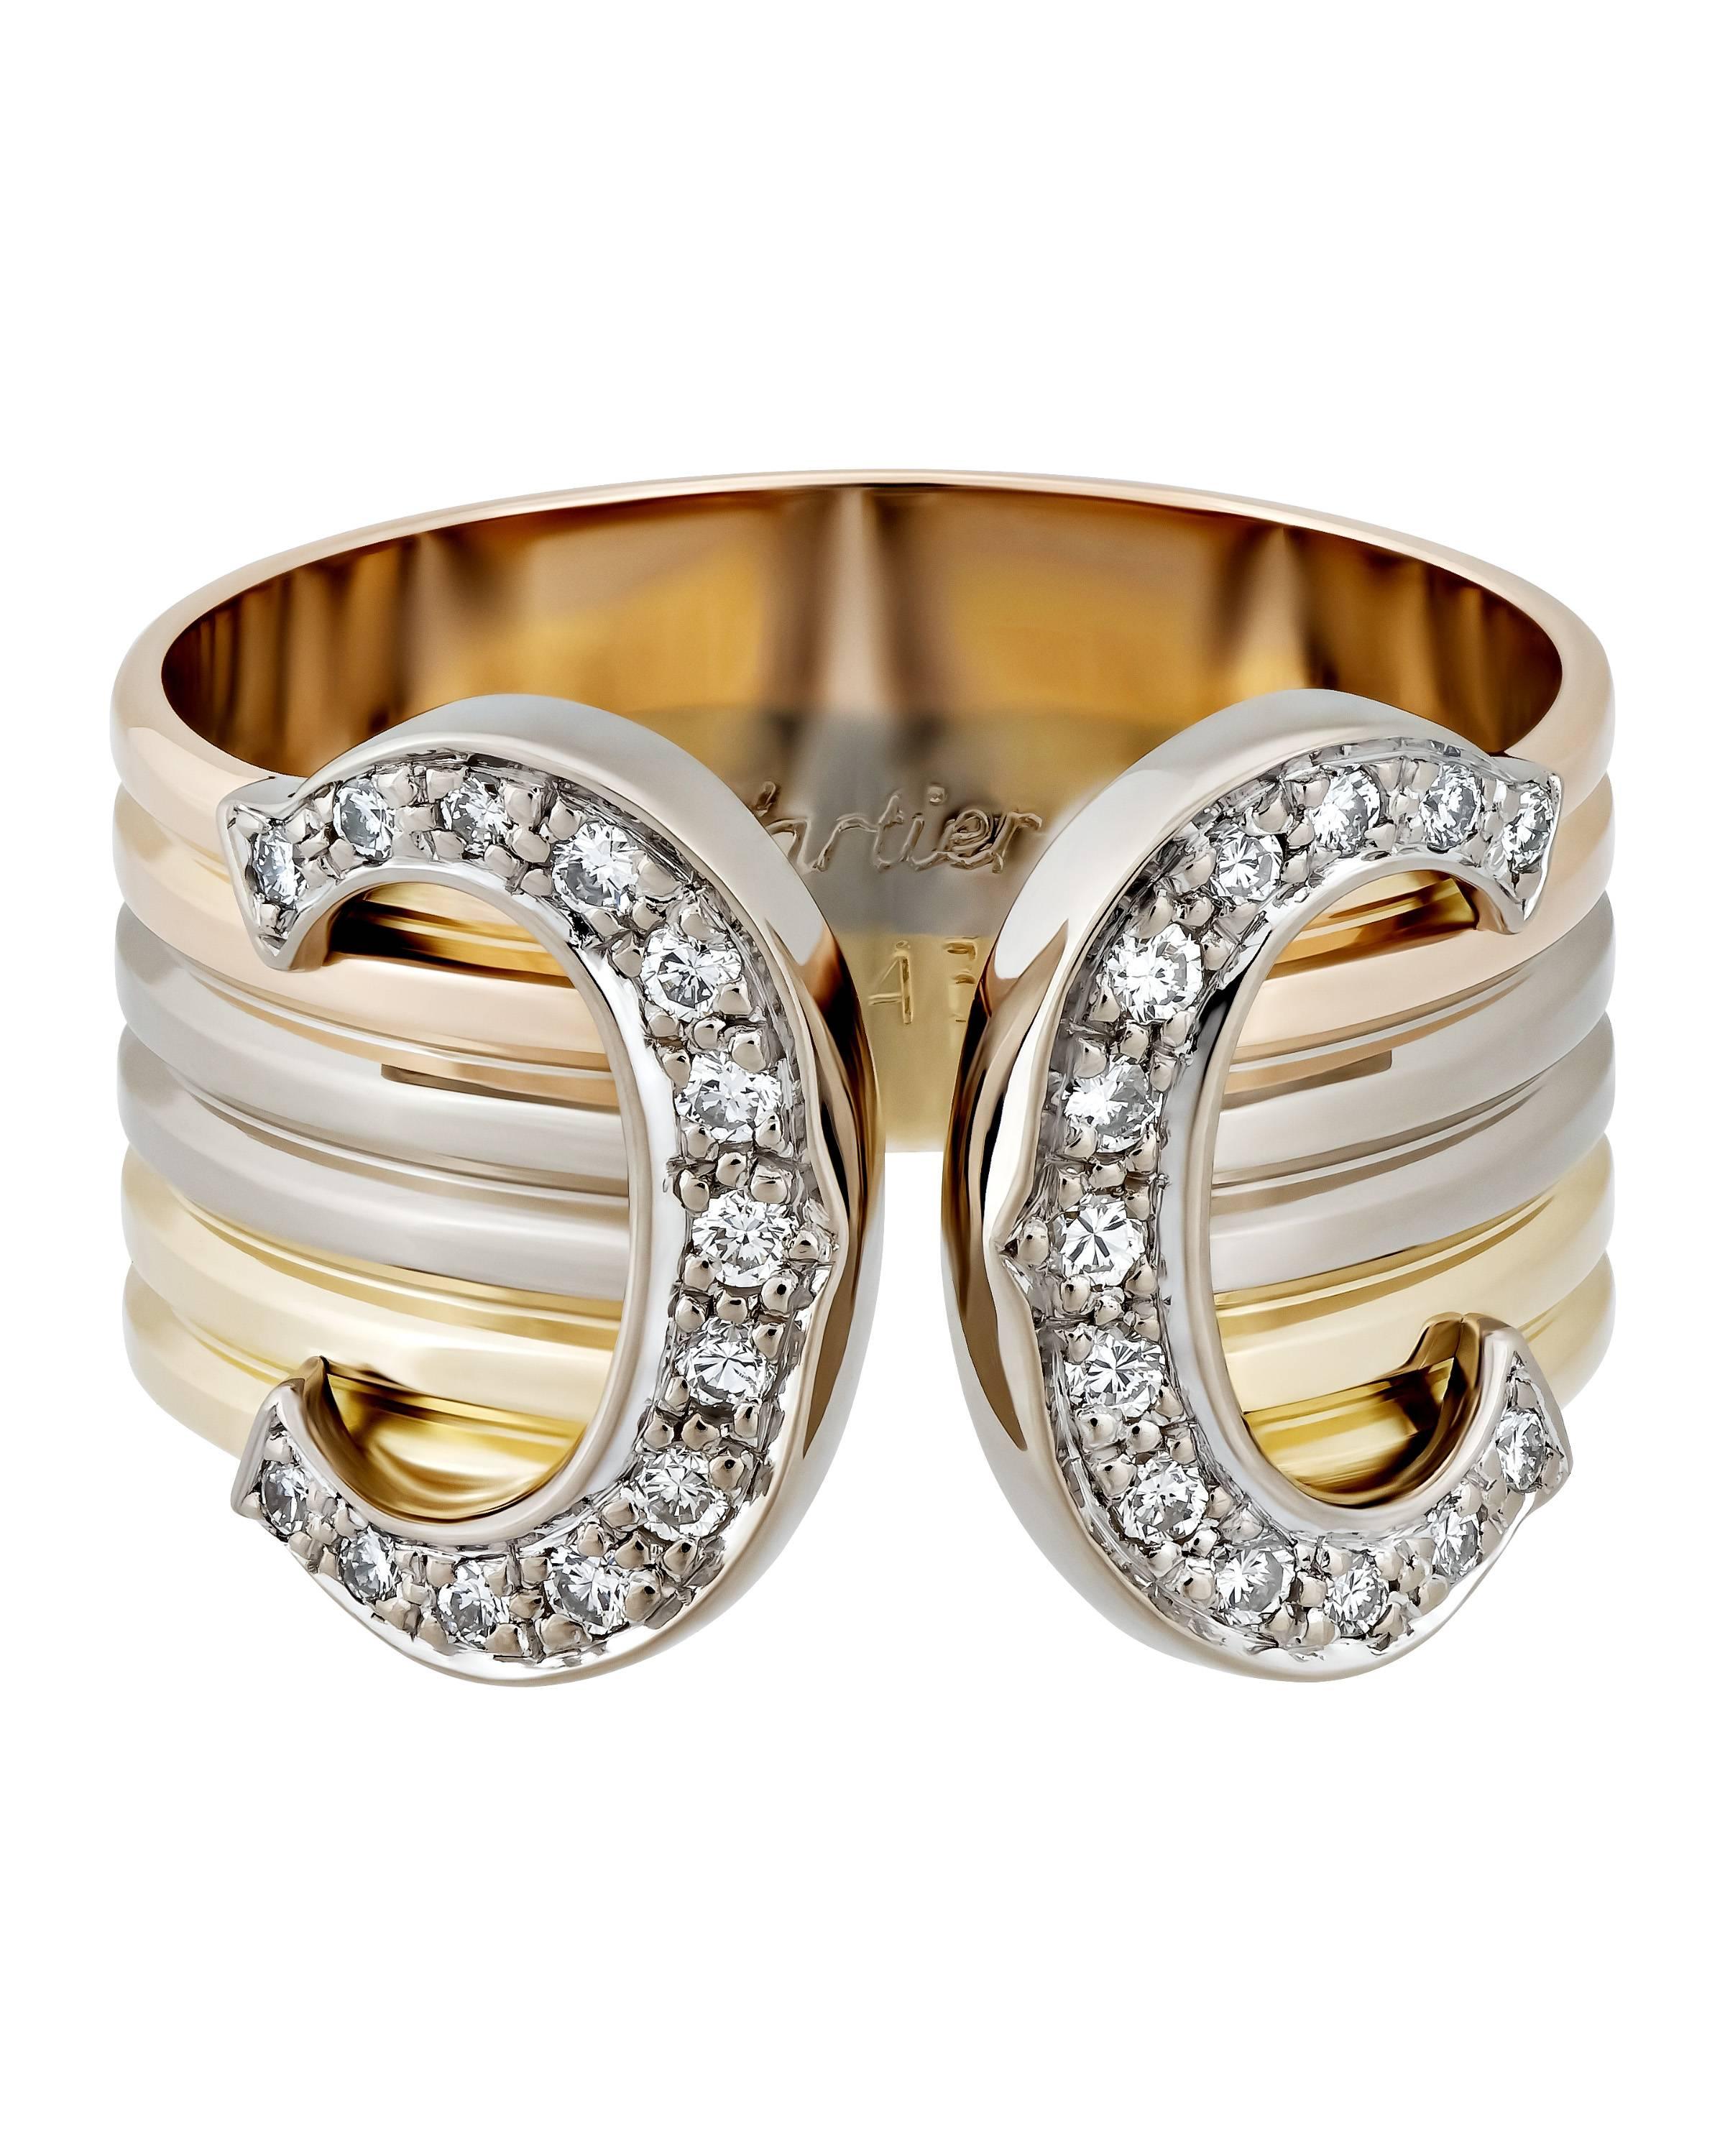 Metal: 18K Yellow White and Rose Gold
Weight: 6.9g
TCW: .25ct
Ring Size: 8